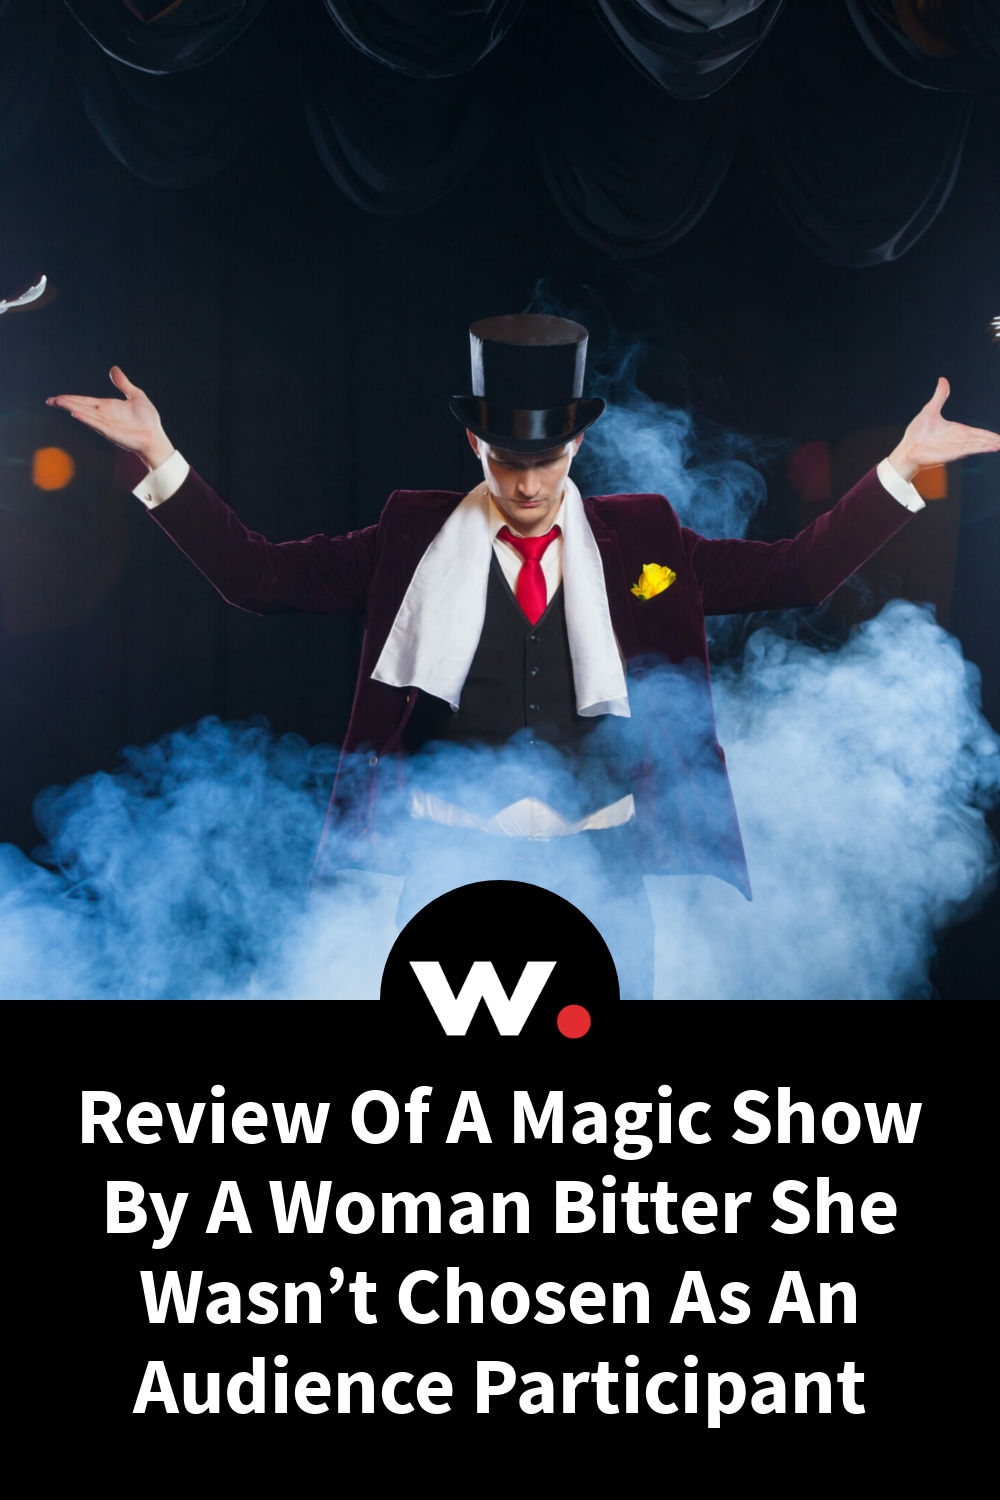 Review Of A Magic Show By A Woman Bitter She Wasn’t Chosen As An Audience Participant